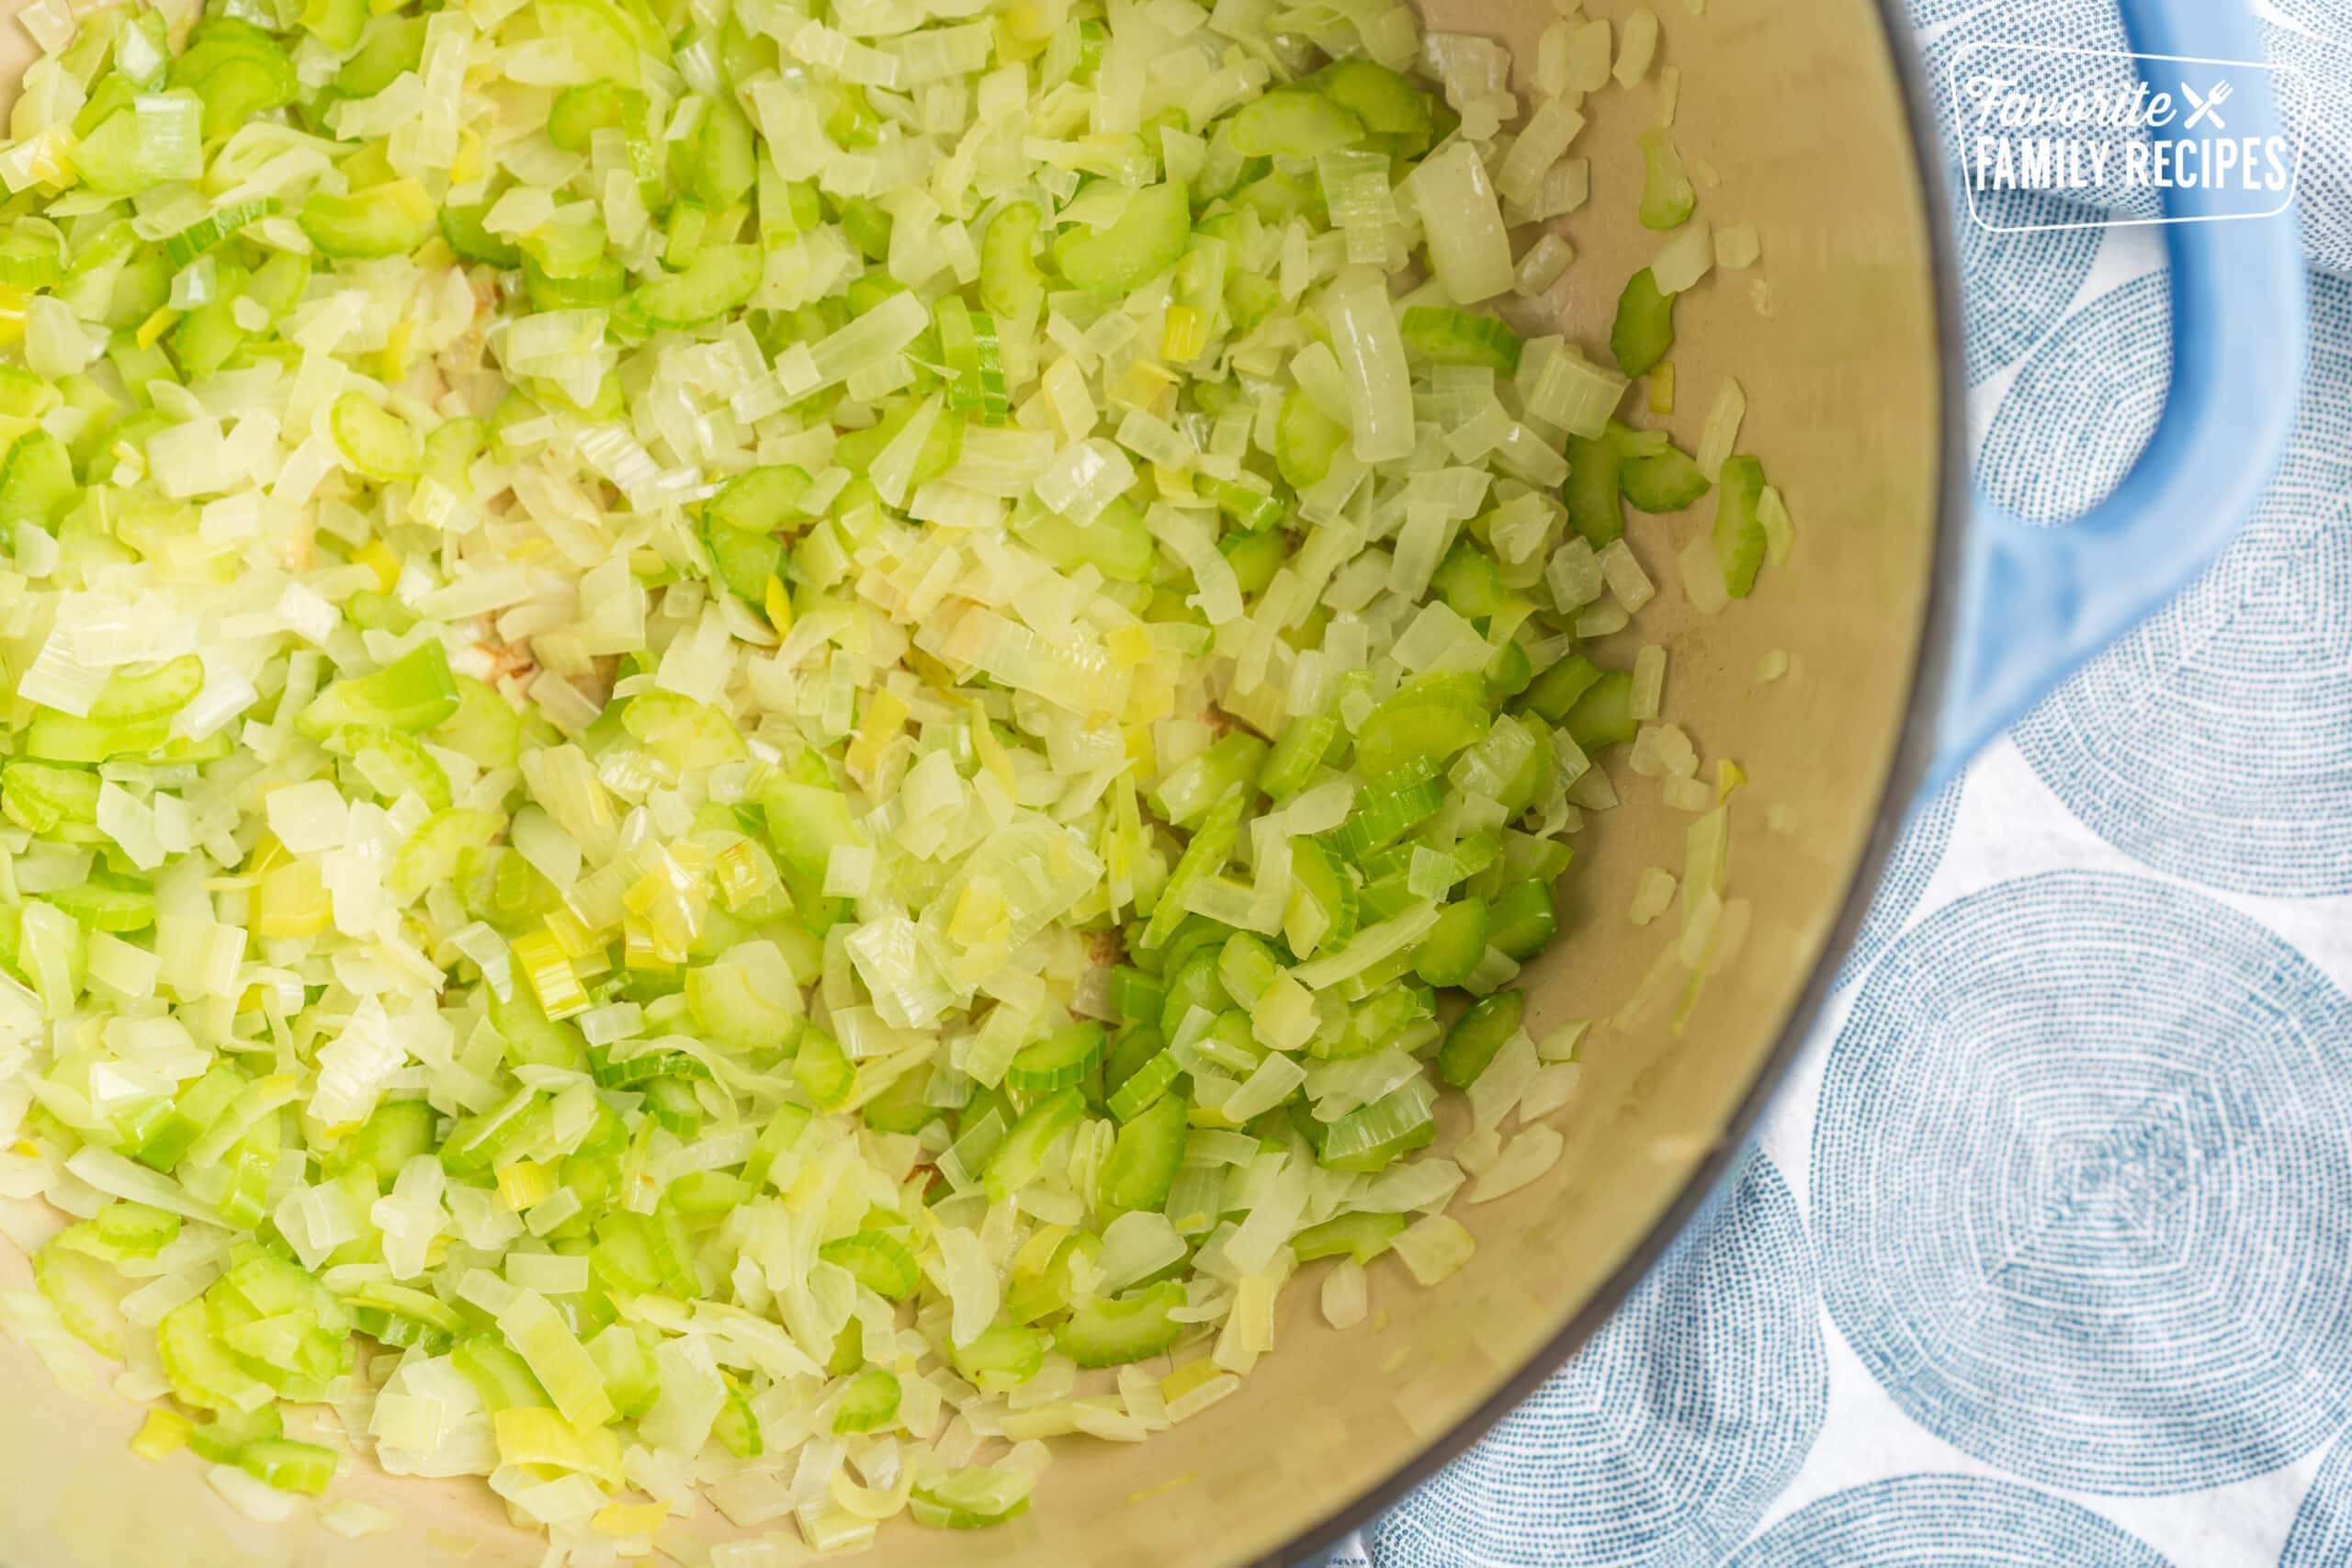 Celery, leeks, and onions cooked in a large pot